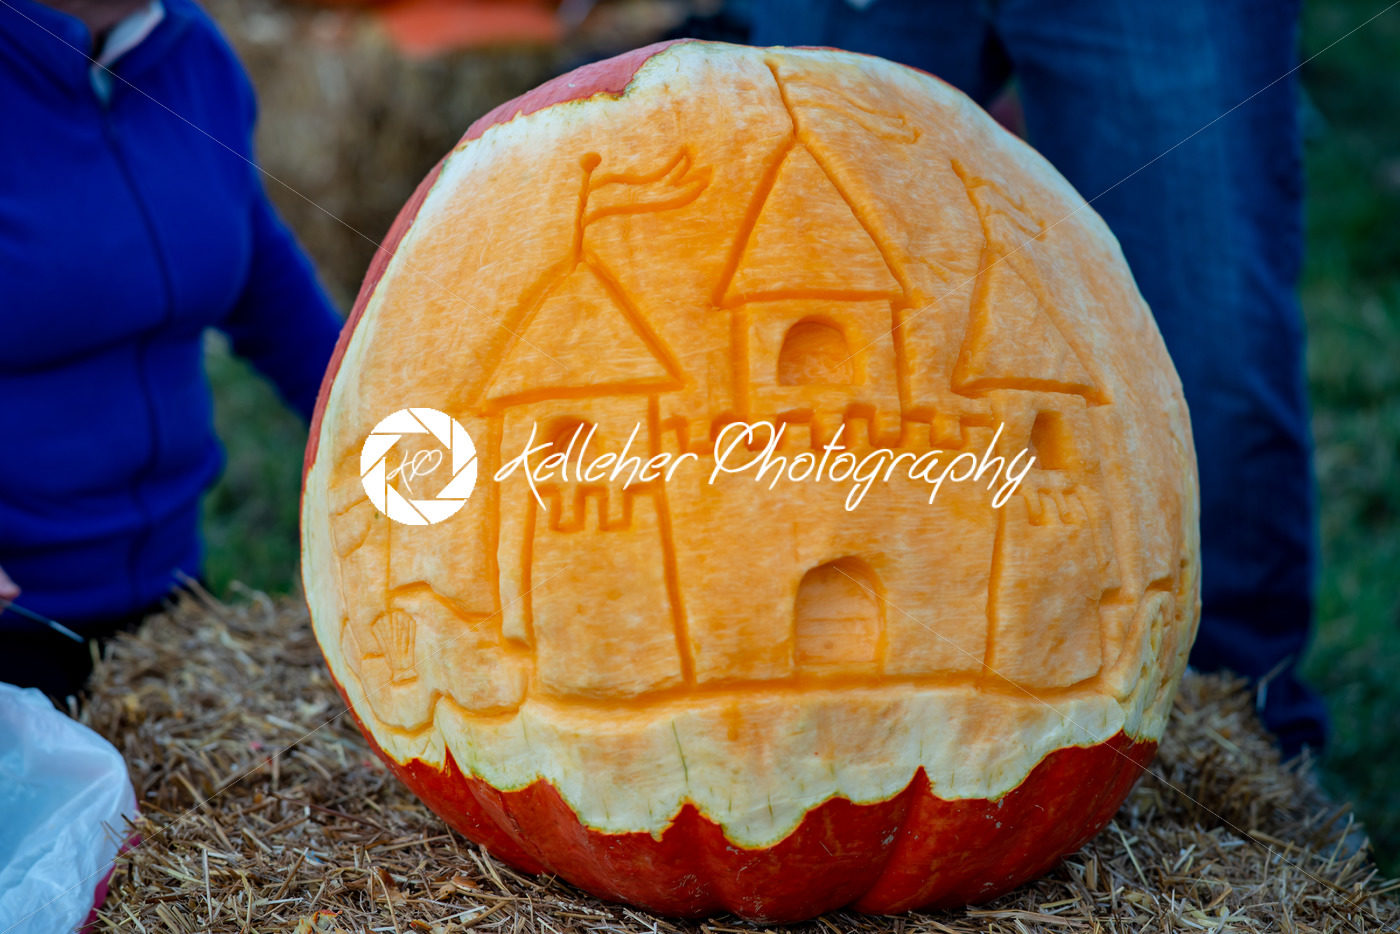 CHADDS FORD, PA – OCTOBER 18: Castle at The Great Pumpkin Carve carving contest on October 18, 2018 - Kelleher Photography Store